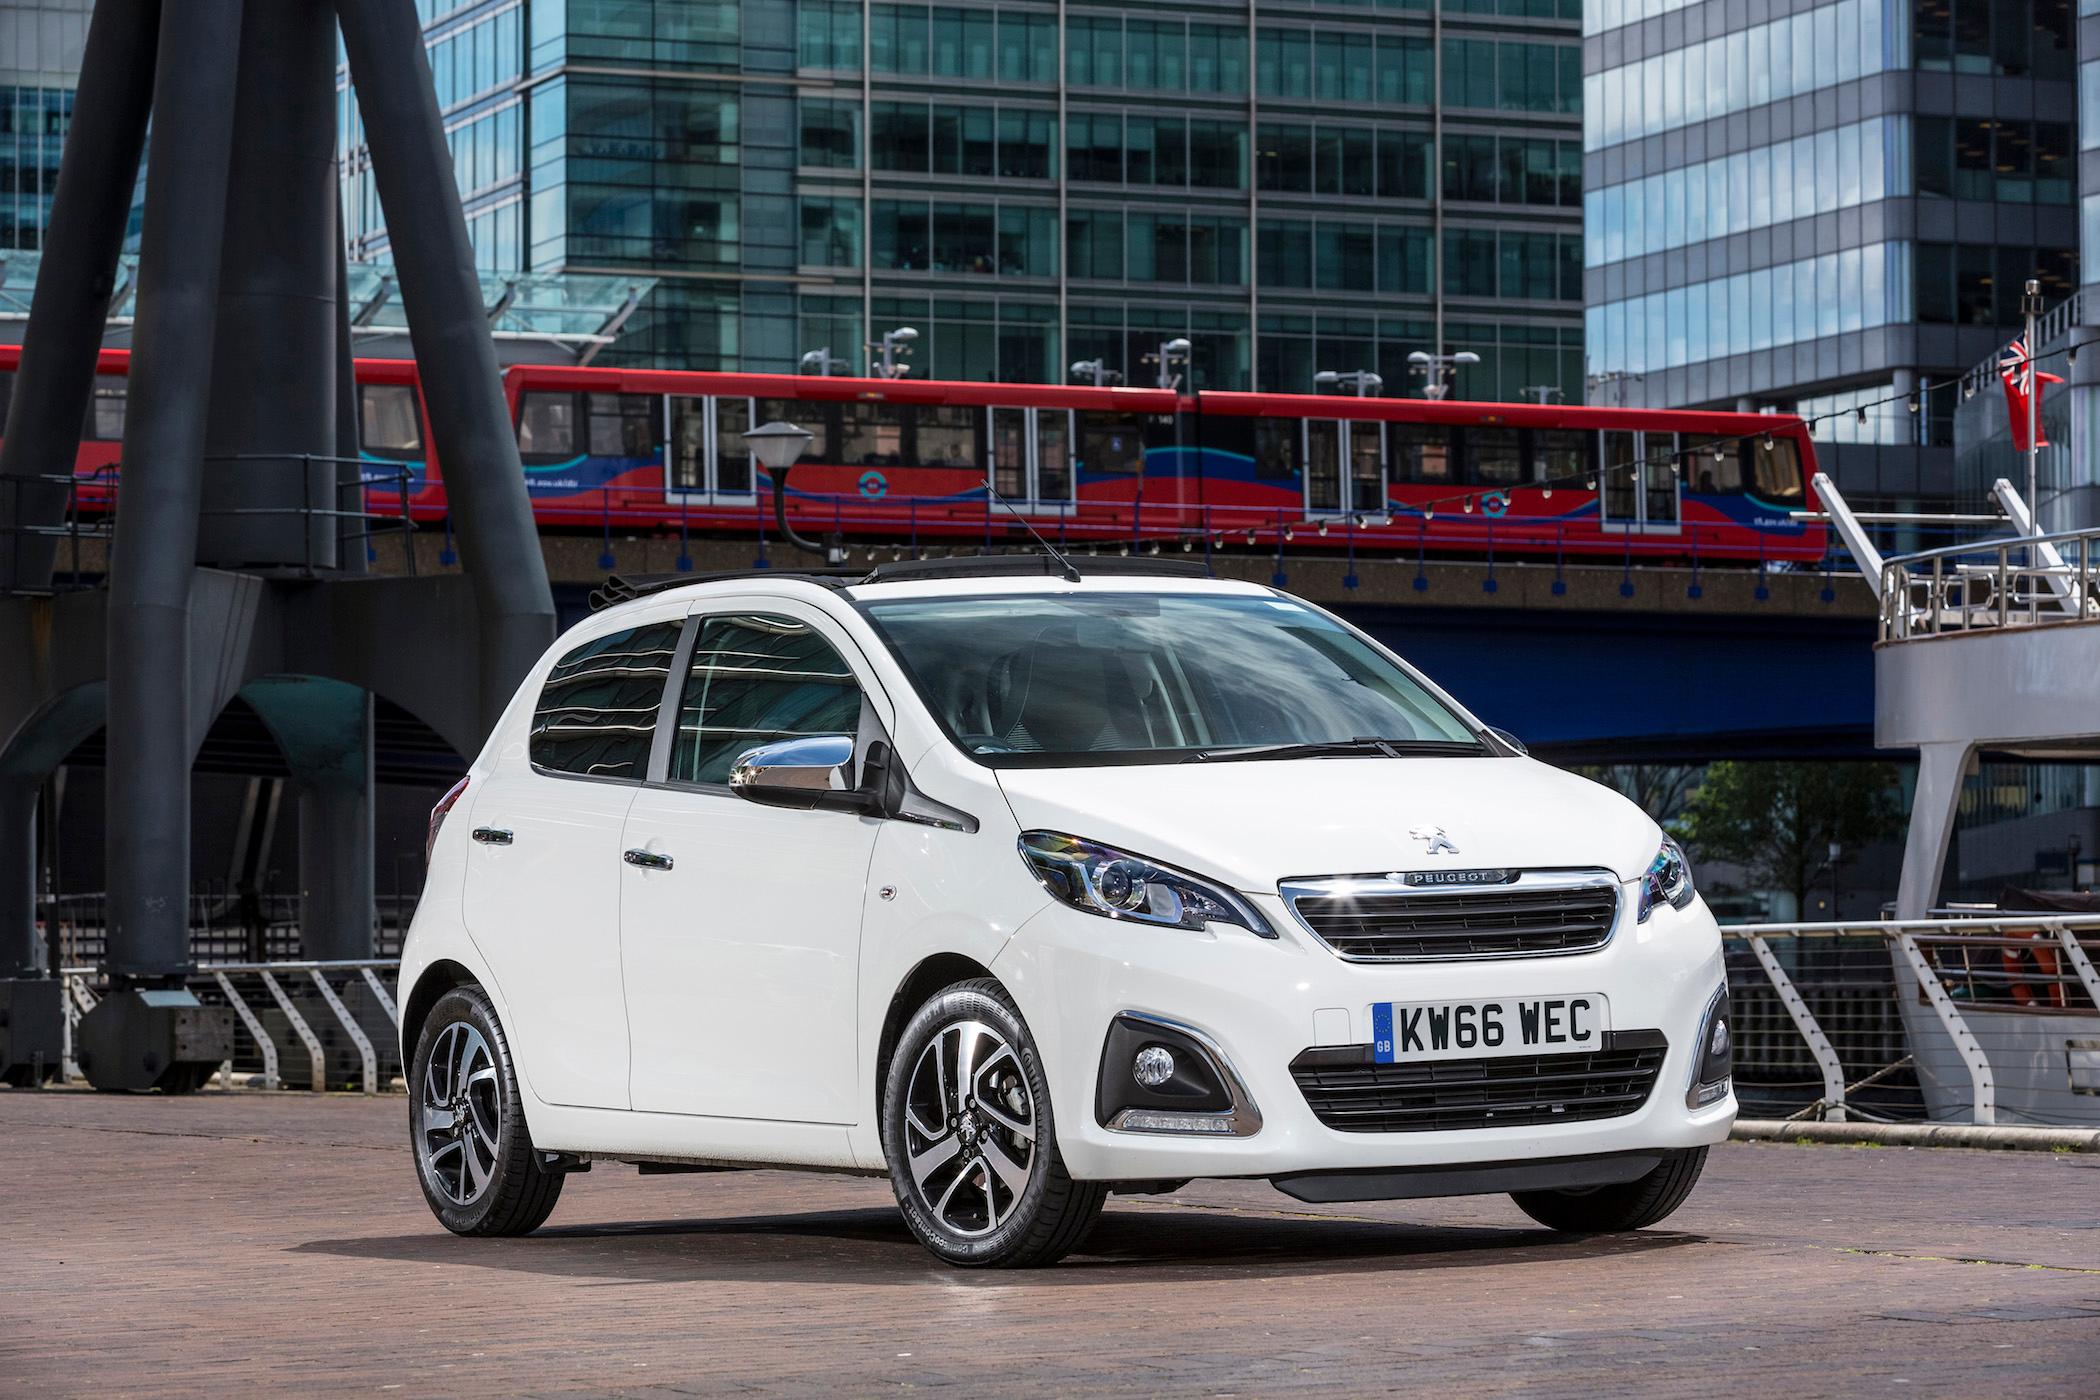 a white peugeot 108 parked in london